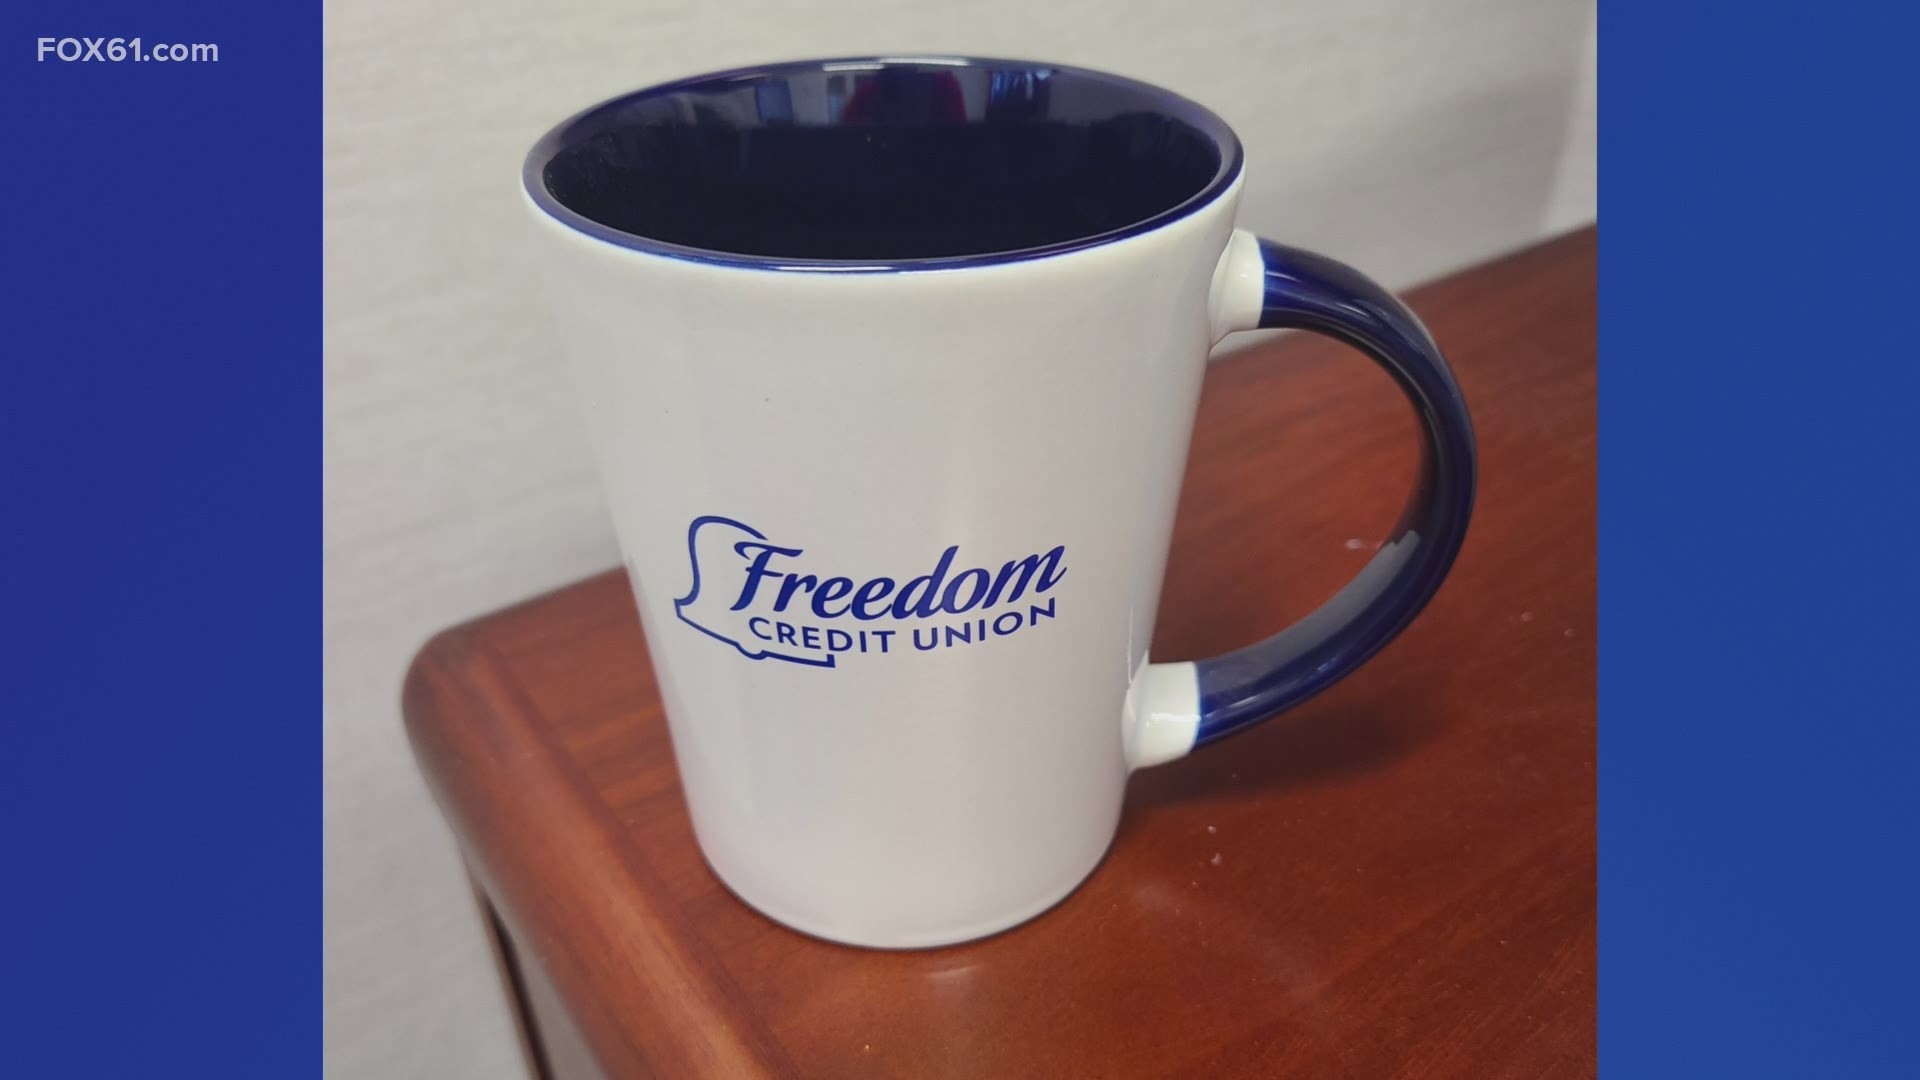 For this morning's Coffee Cup Salute we're saying hello to Freedom Credit Union!